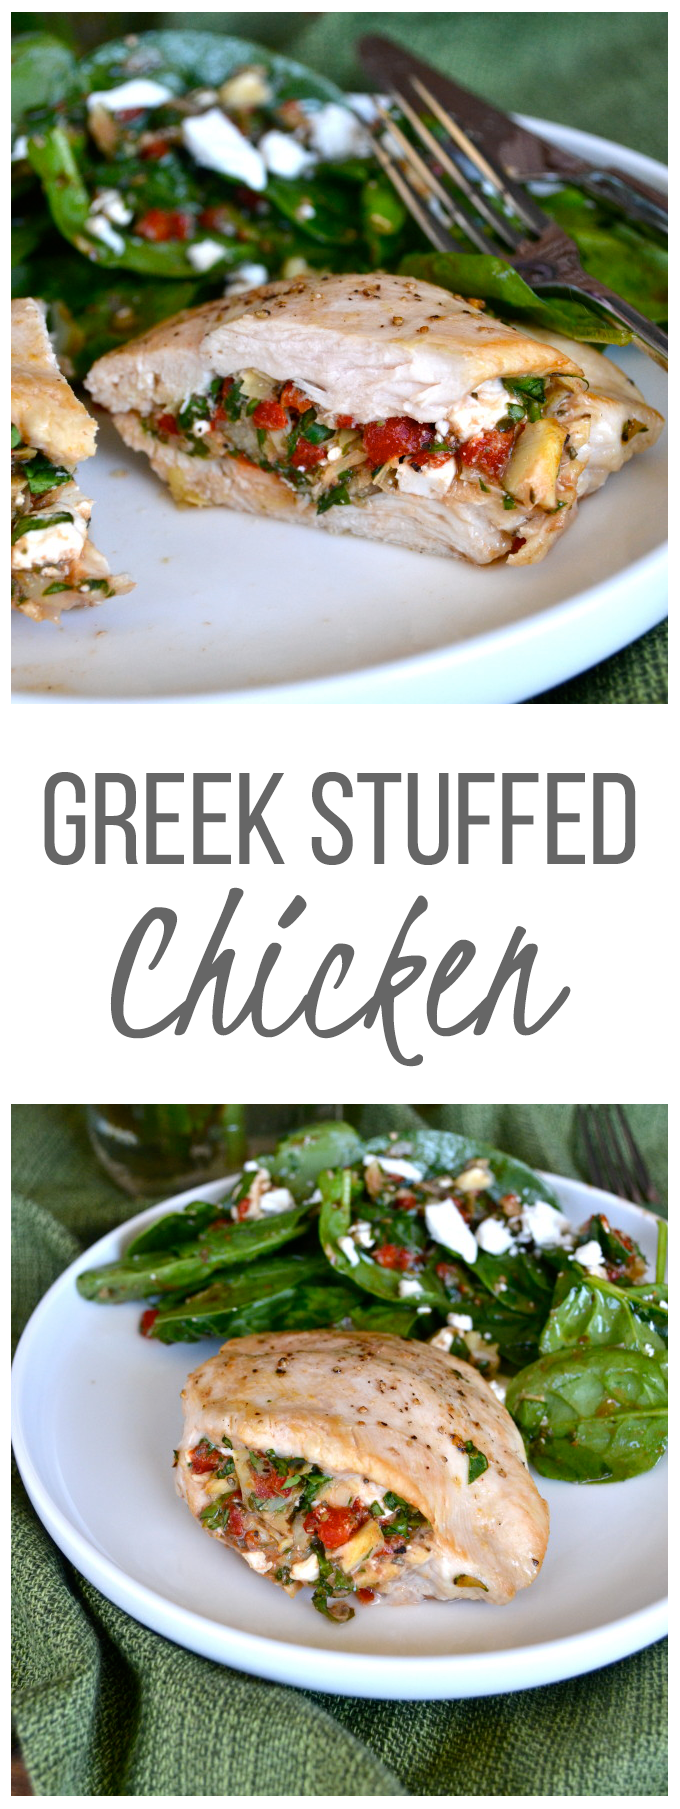 Greek Stuffed Chicken - A great simple chicken breast recipe filled with real food goodness!